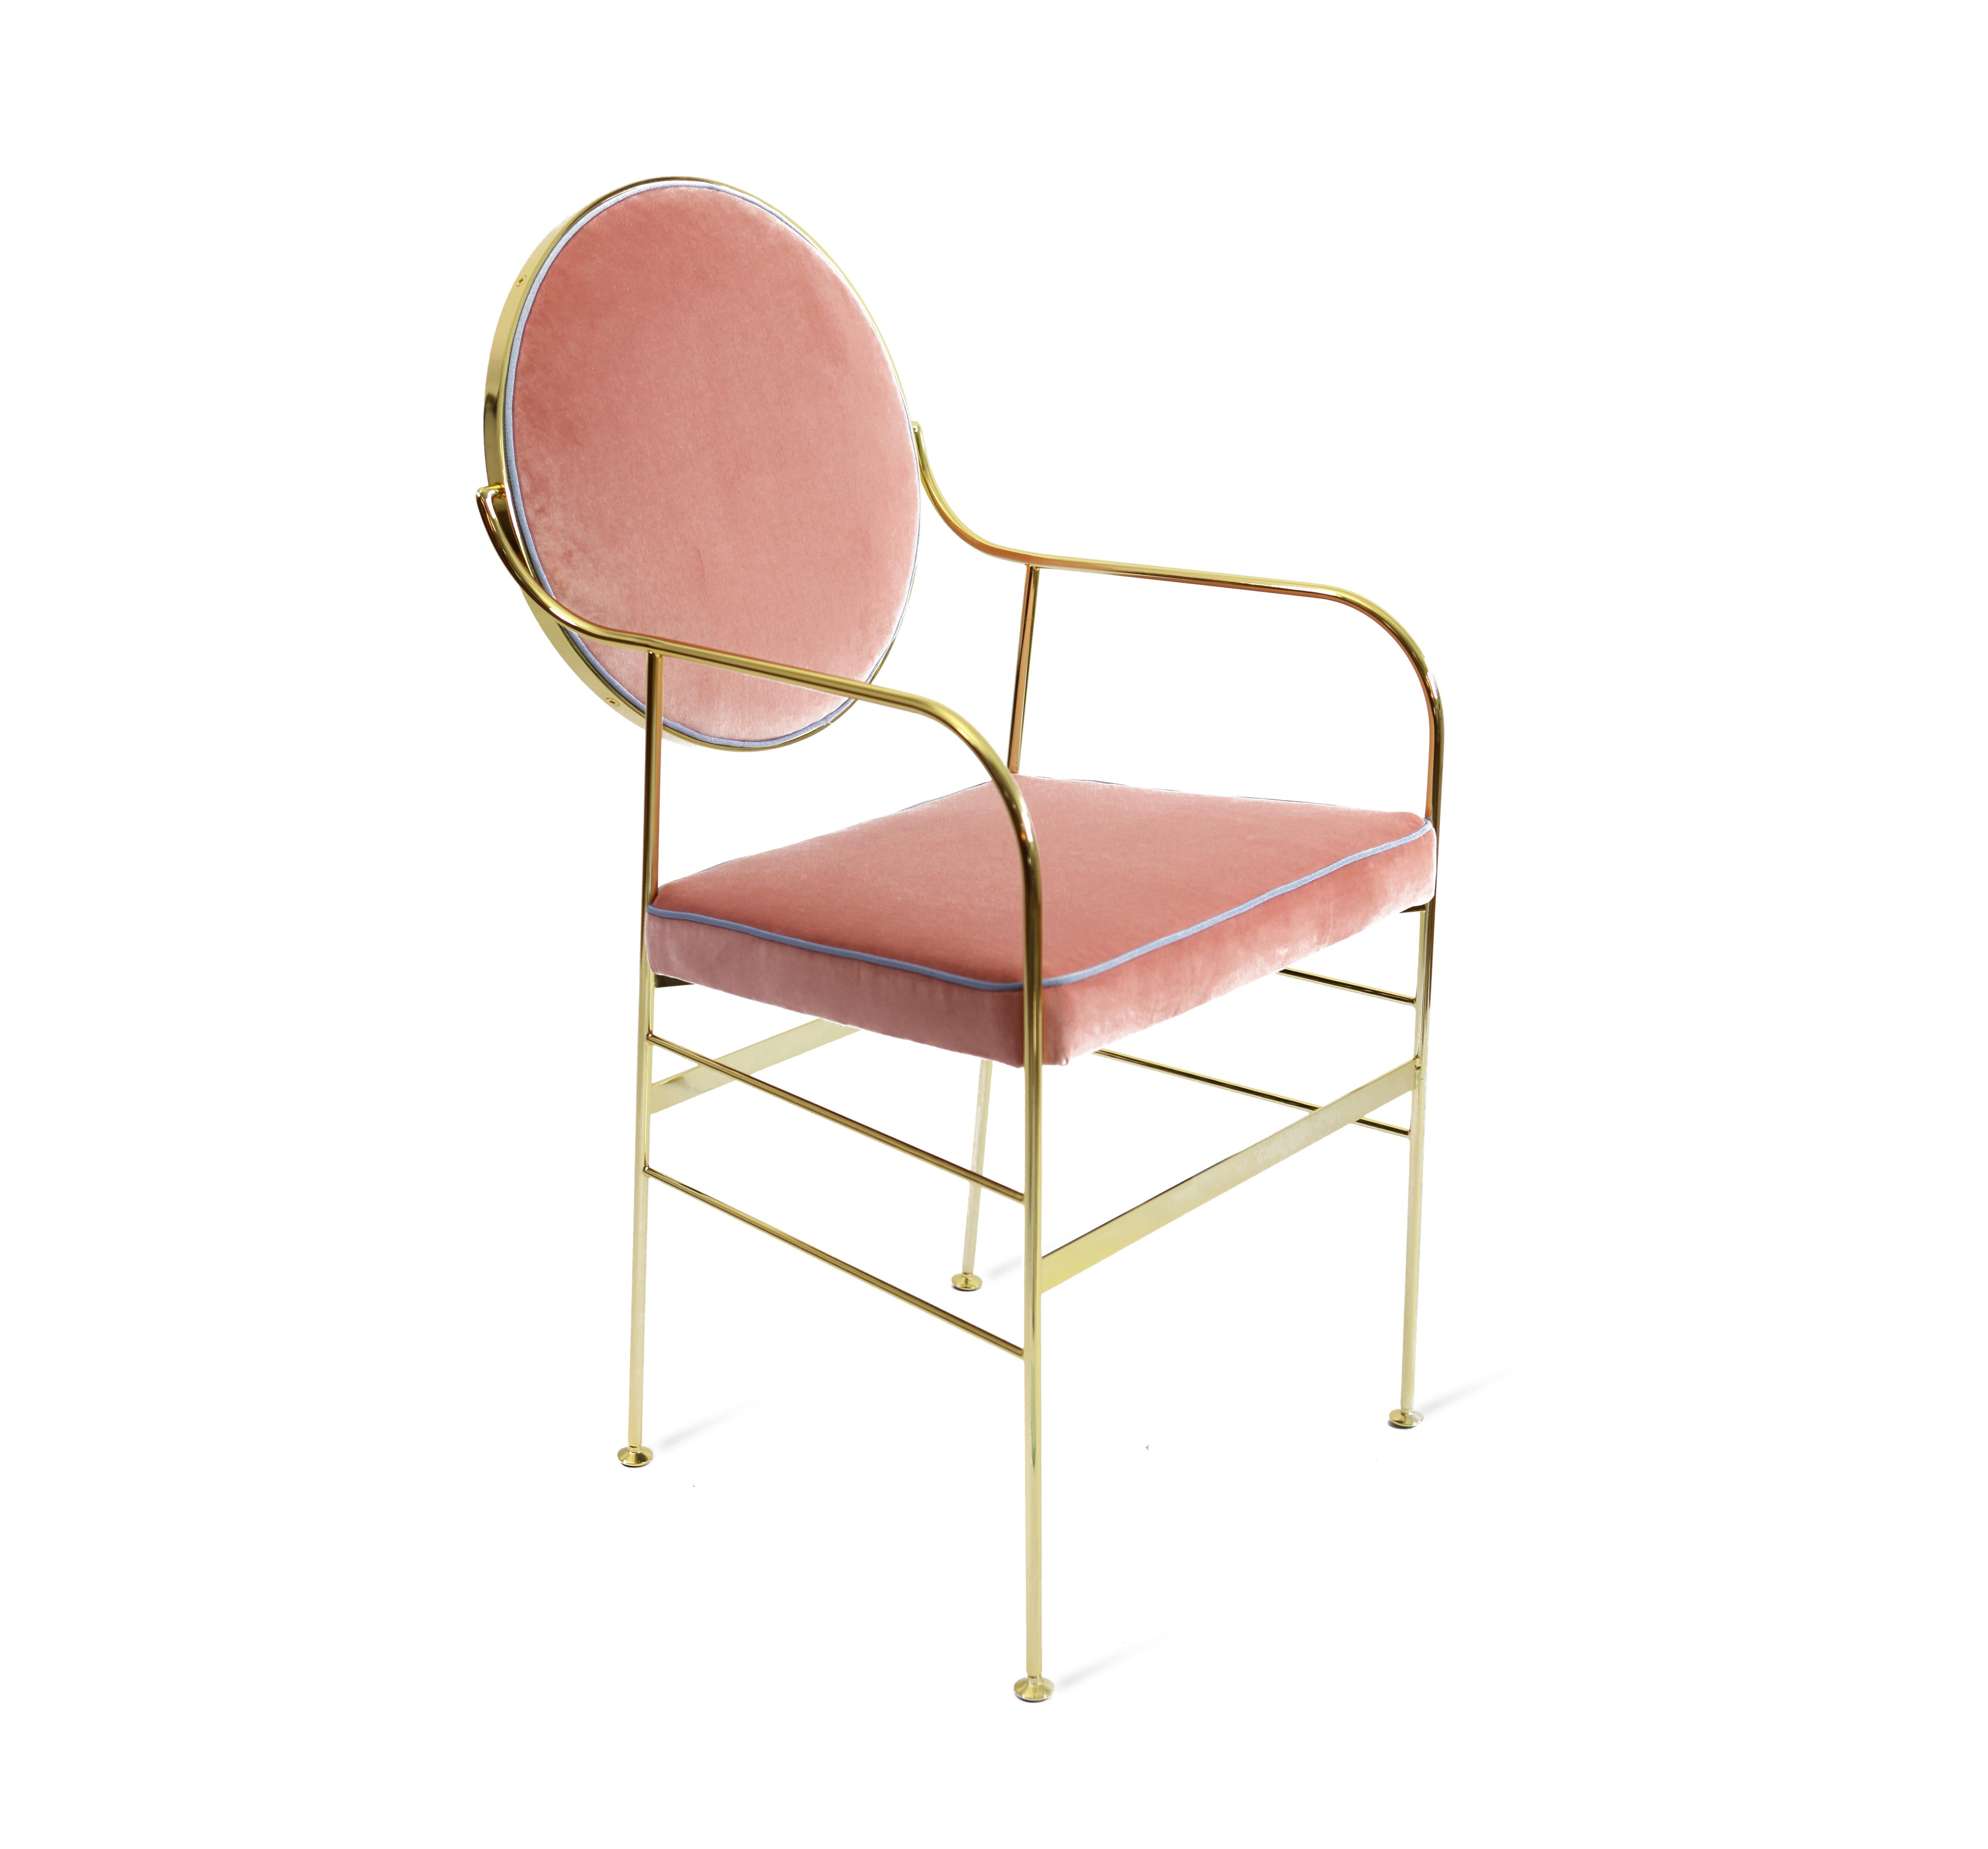 This striking chair has an iron structure covered with a 24-karat gold flash plating, and elegant galvanized brass feet. The back cushions (which move to achieve the perfect orientation) and the seat are covered in cotton velvet available in a range